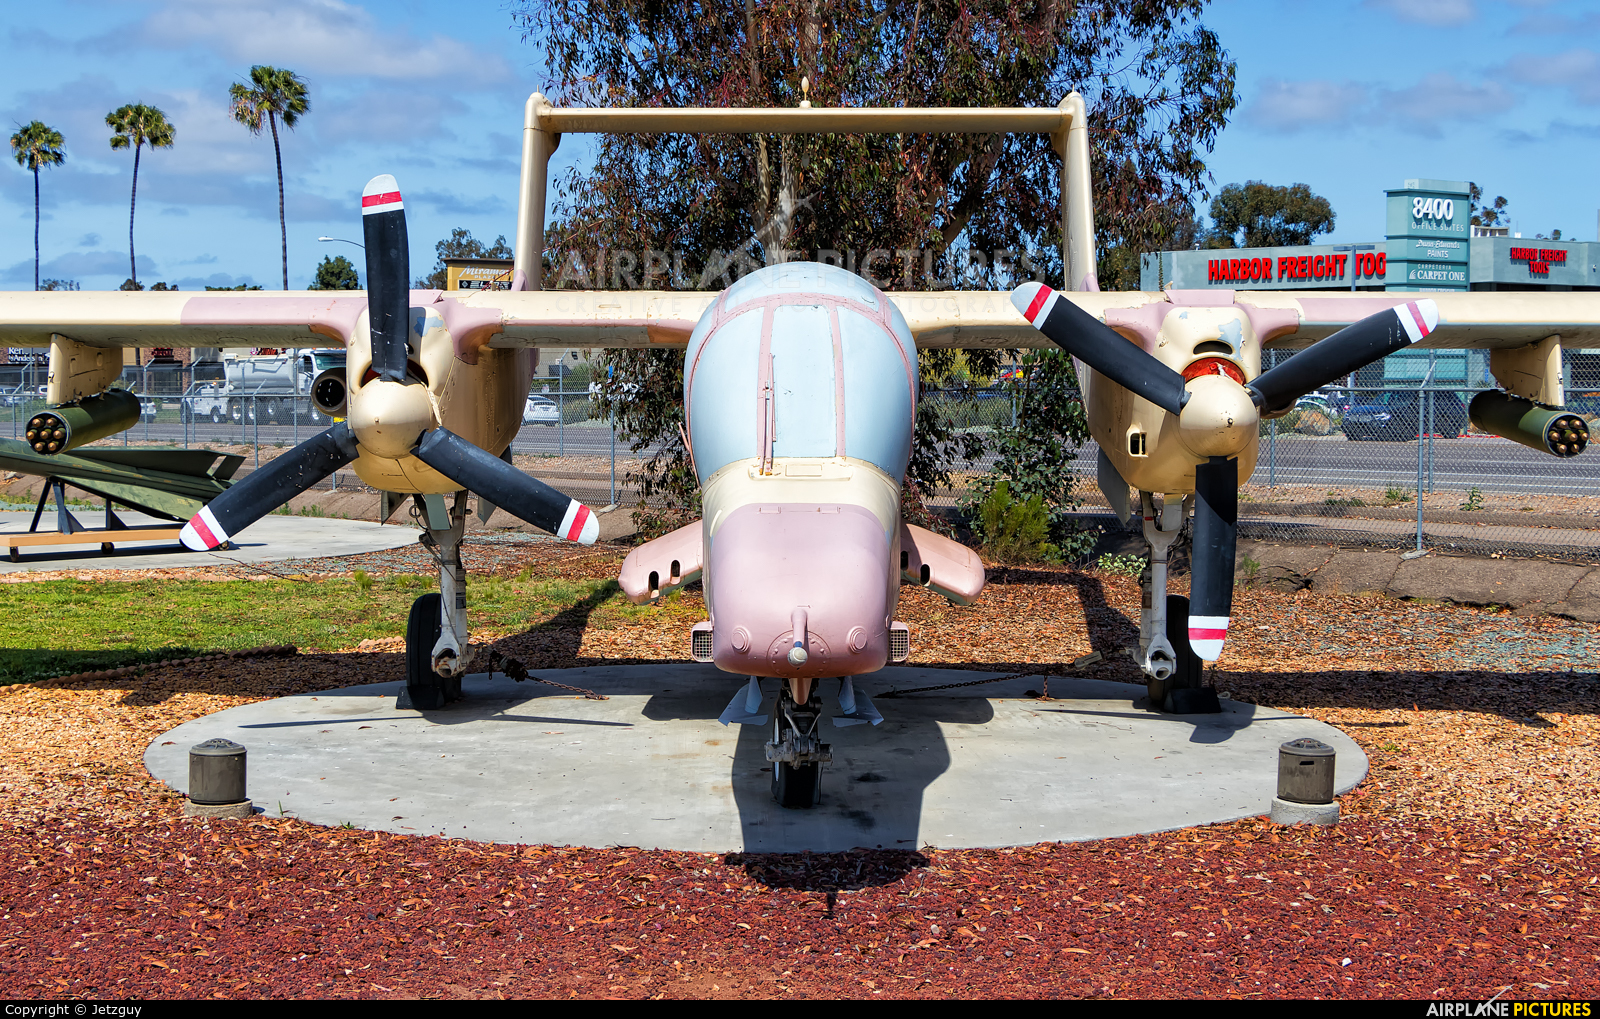 USA - Marine Corps 155494 aircraft at Miramar MCAS - Flying Leatherneck Aviation Museum